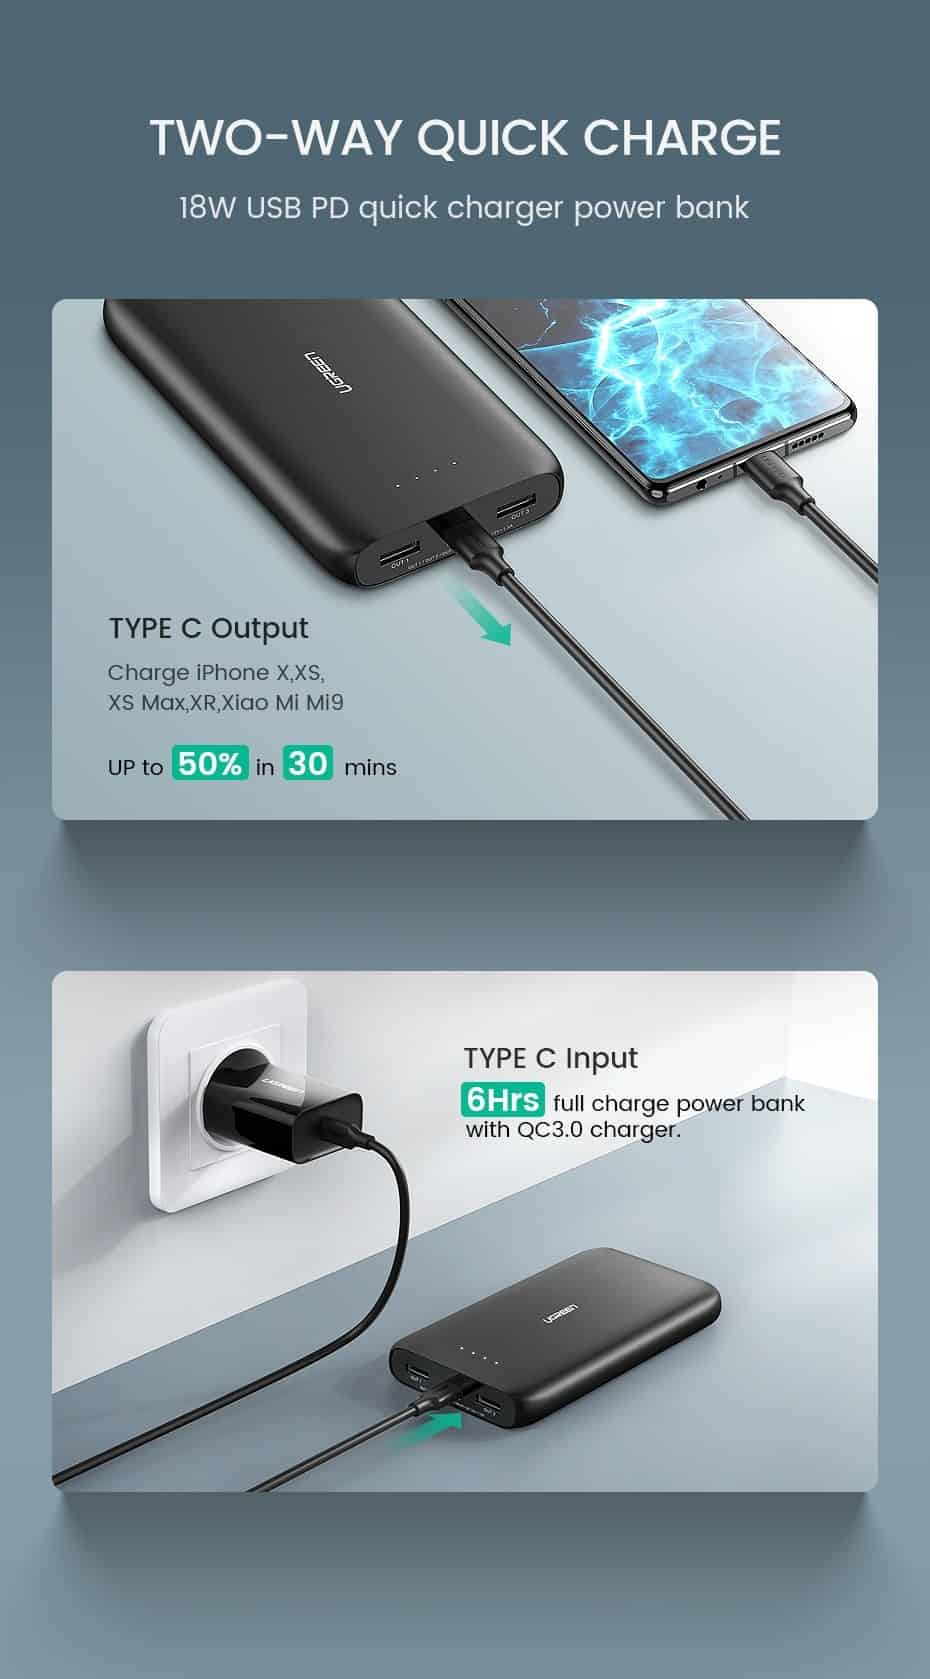 Ugreen Power Bank 20000mAh Fast Phone Charger Quick Charge 4.0 QC3.0 Portable External Battery for iPhone 11 XiaoMi PD Powerbank